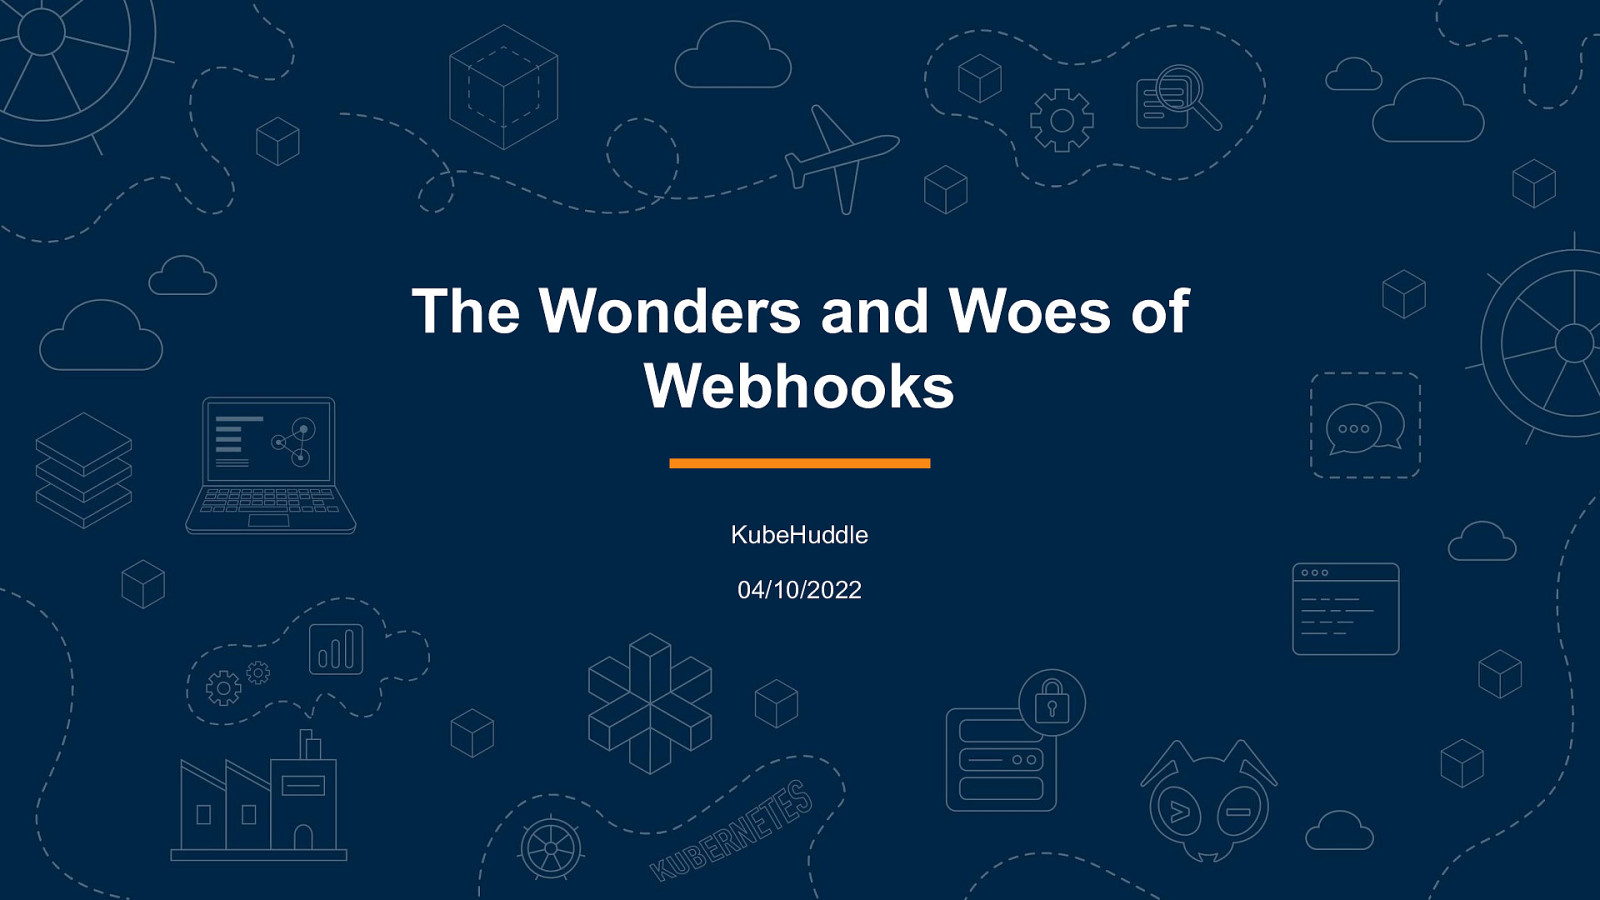 The Wonders and Woes of Webhooks